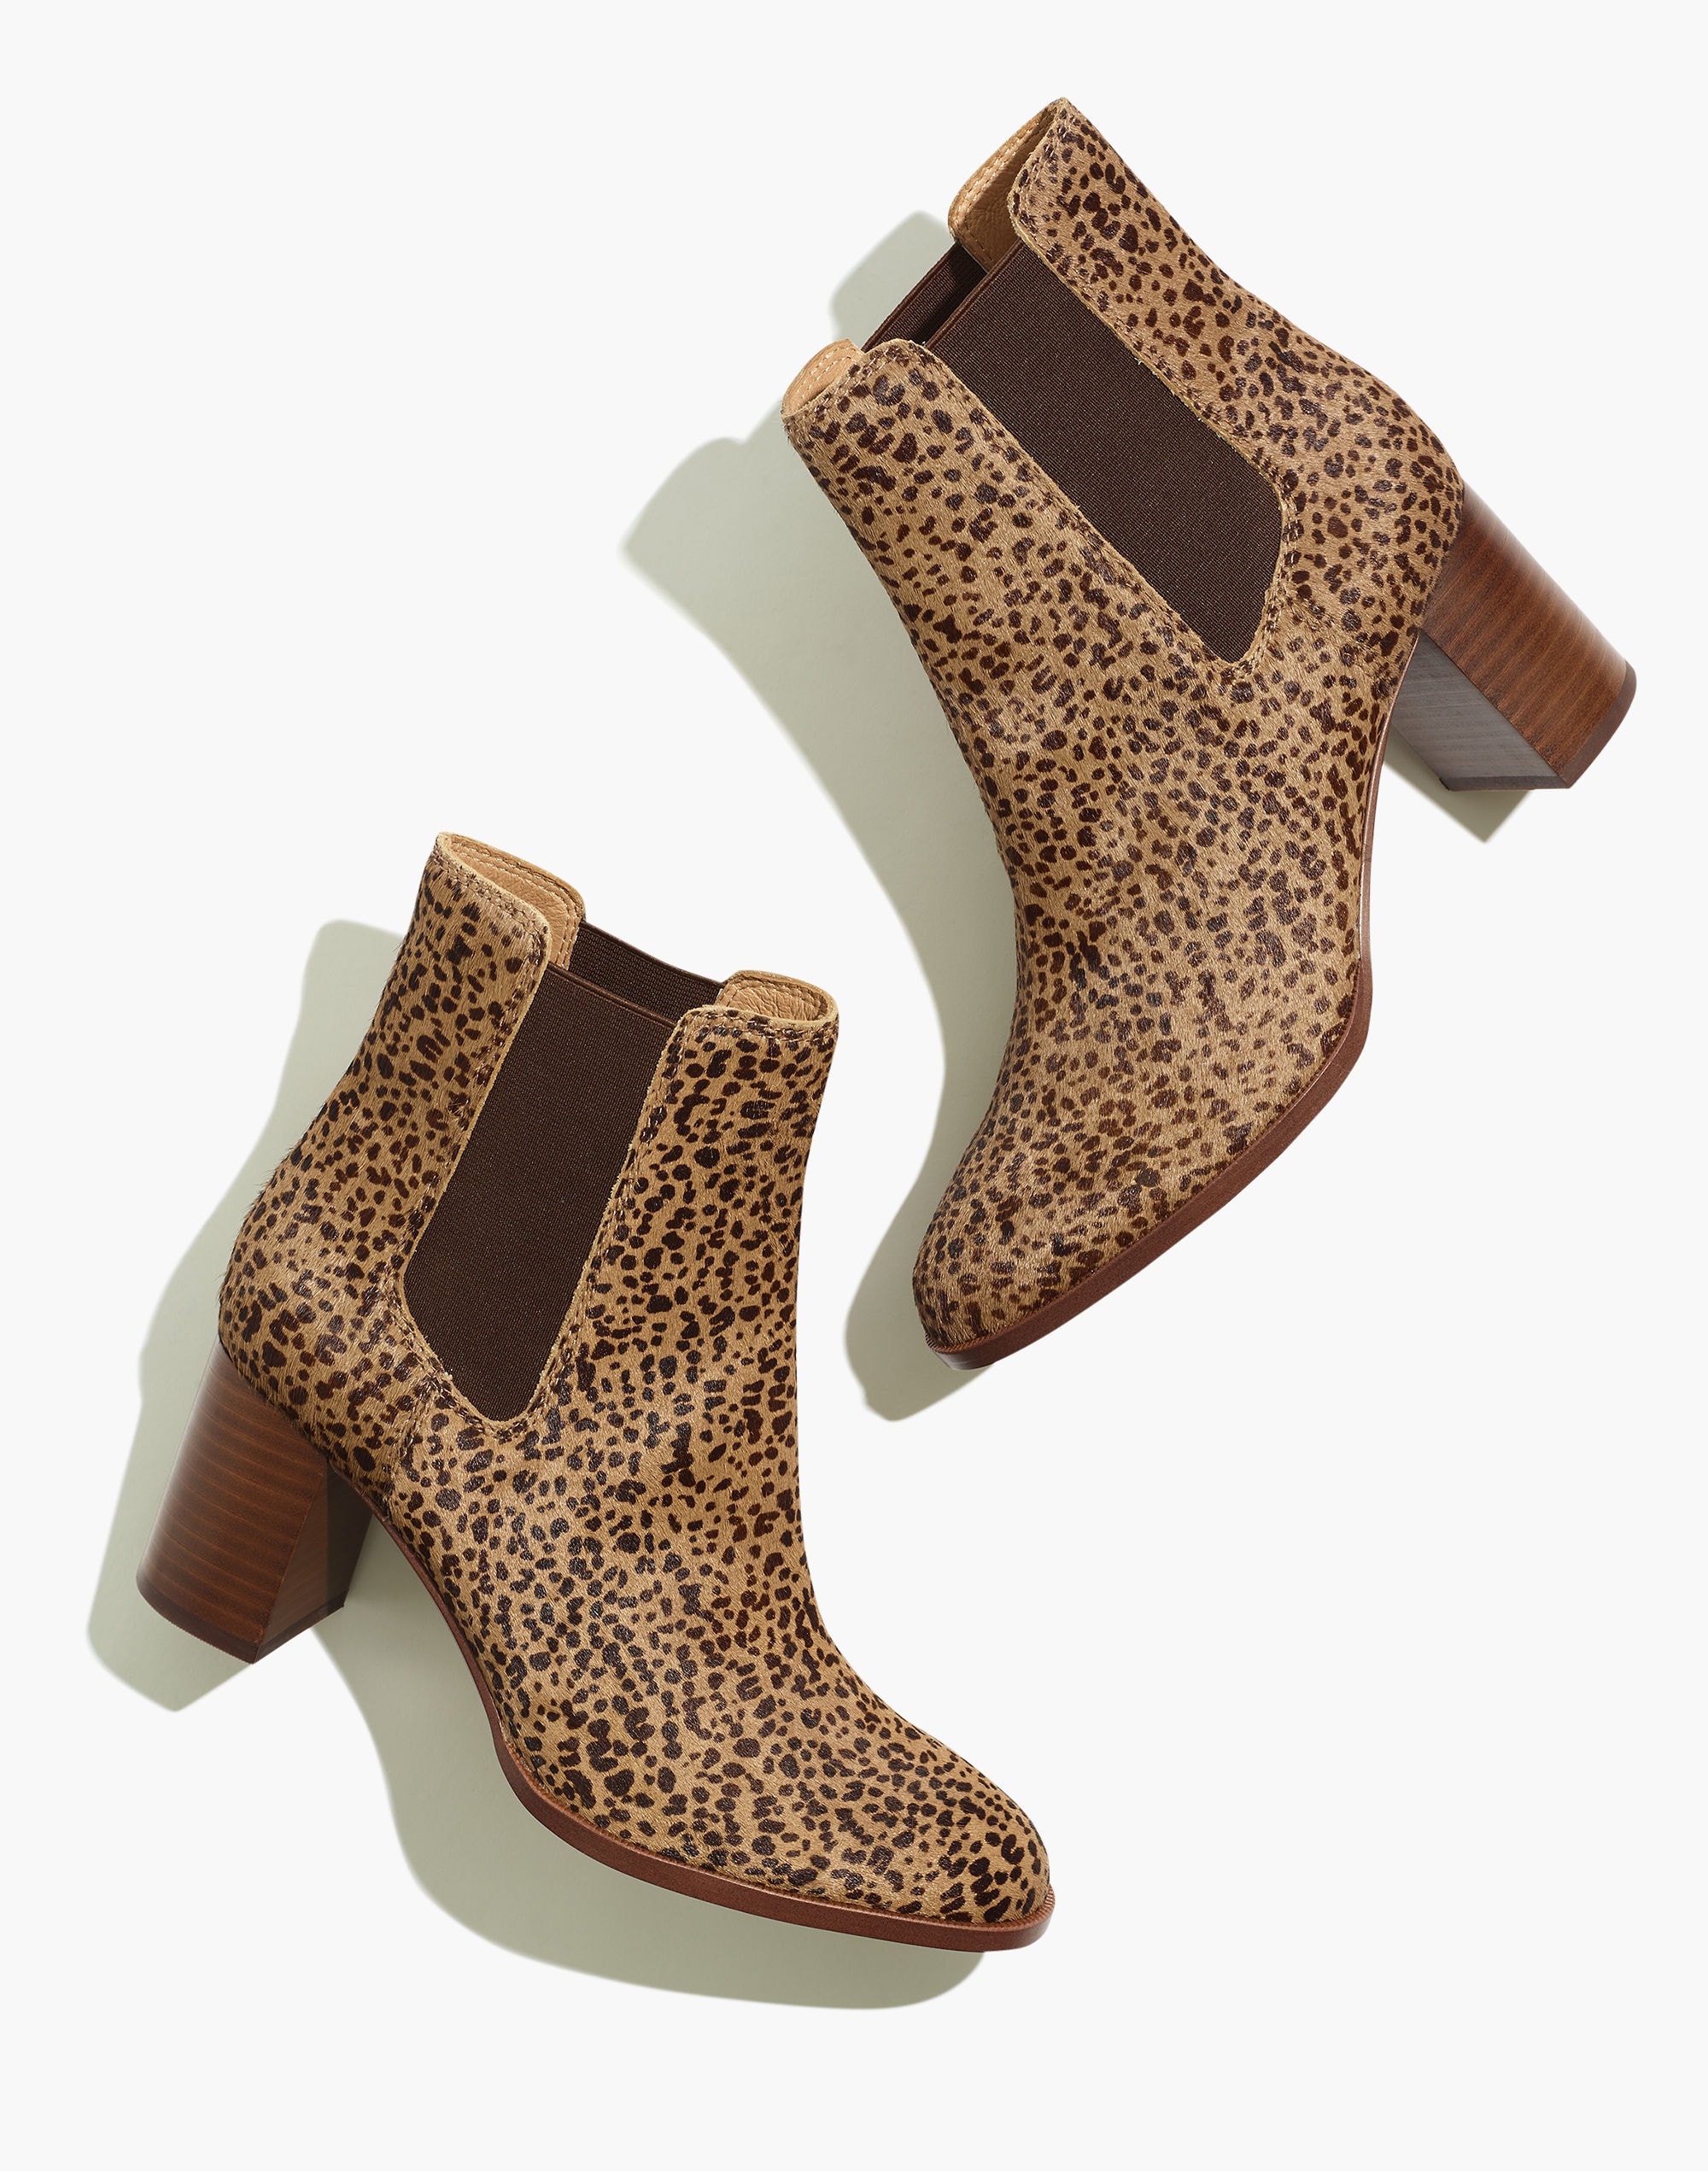 The Laura Chelsea Boot in Spotted Calf Hair